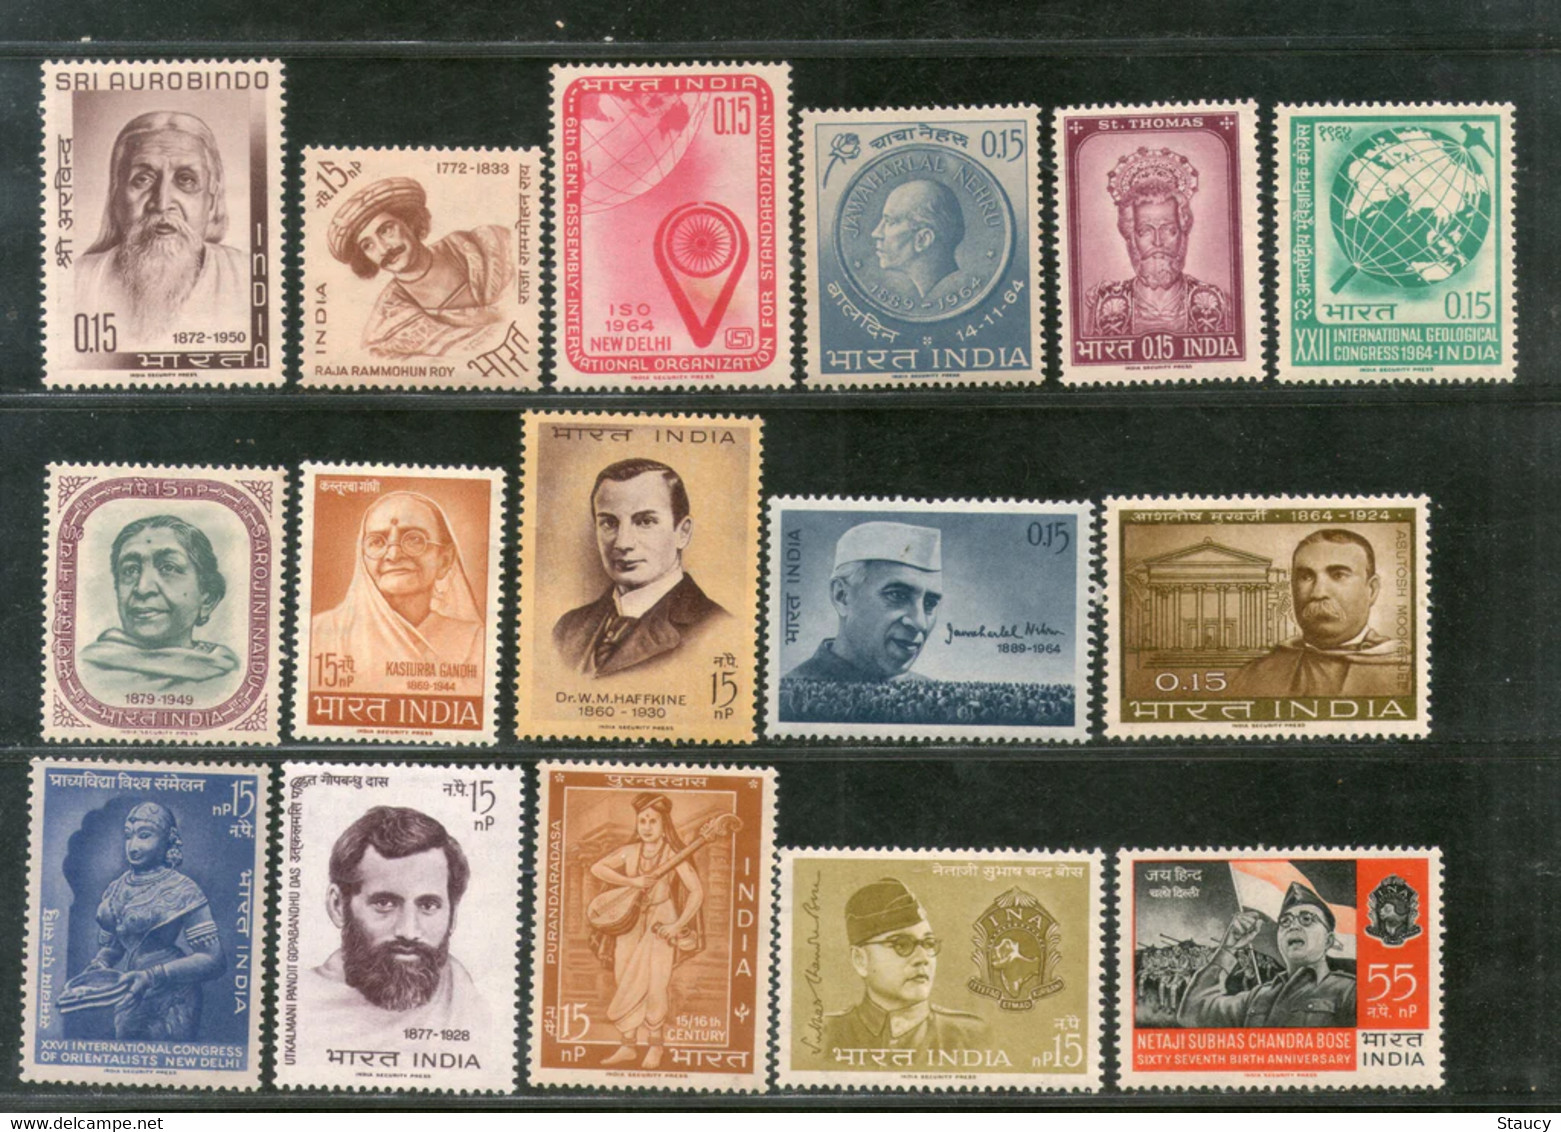 India 1964 Complete Year Pack / Set / Collection Total 16 Stamps (No Missing) MNH As Per Scan - Komplette Jahrgänge